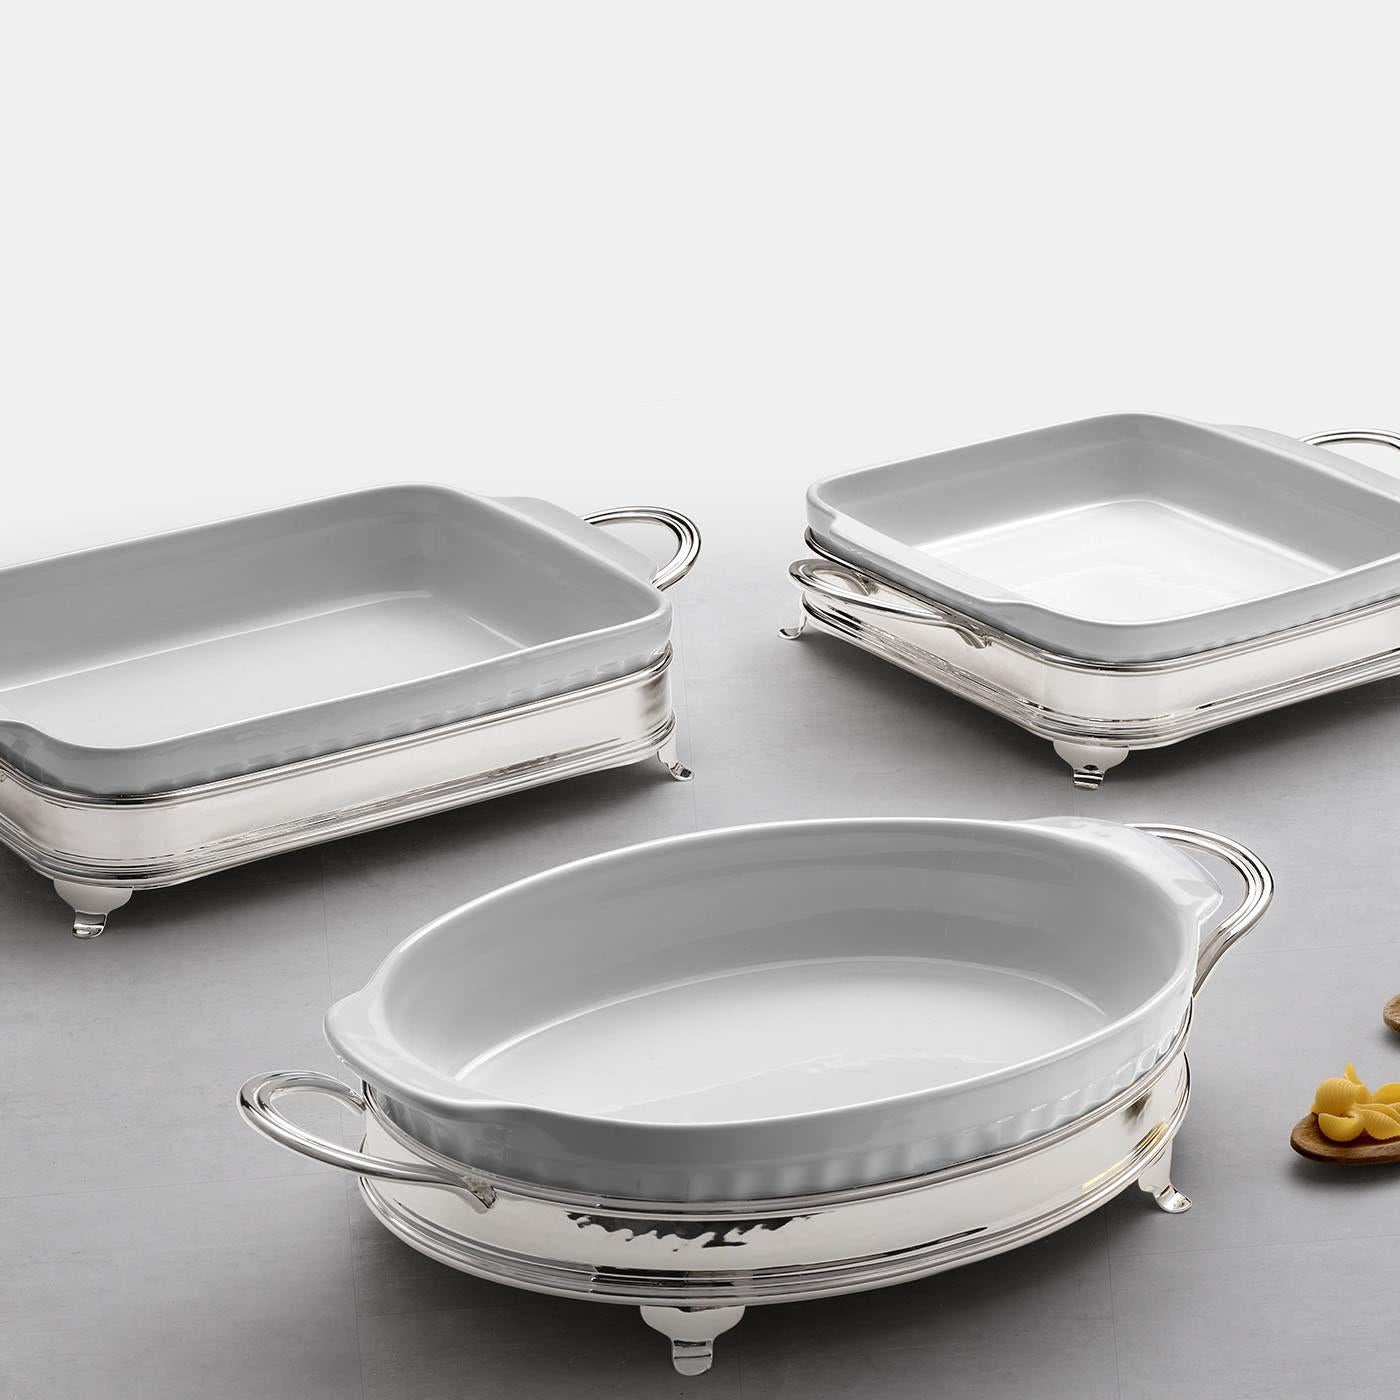 Perfect for elegantly serving food just taken out of the oven and avoiding direct contact with the table, a precious square ceramic baking dish is here offered together with a gleaming silver-plated holder. Equipped with a couple of practical